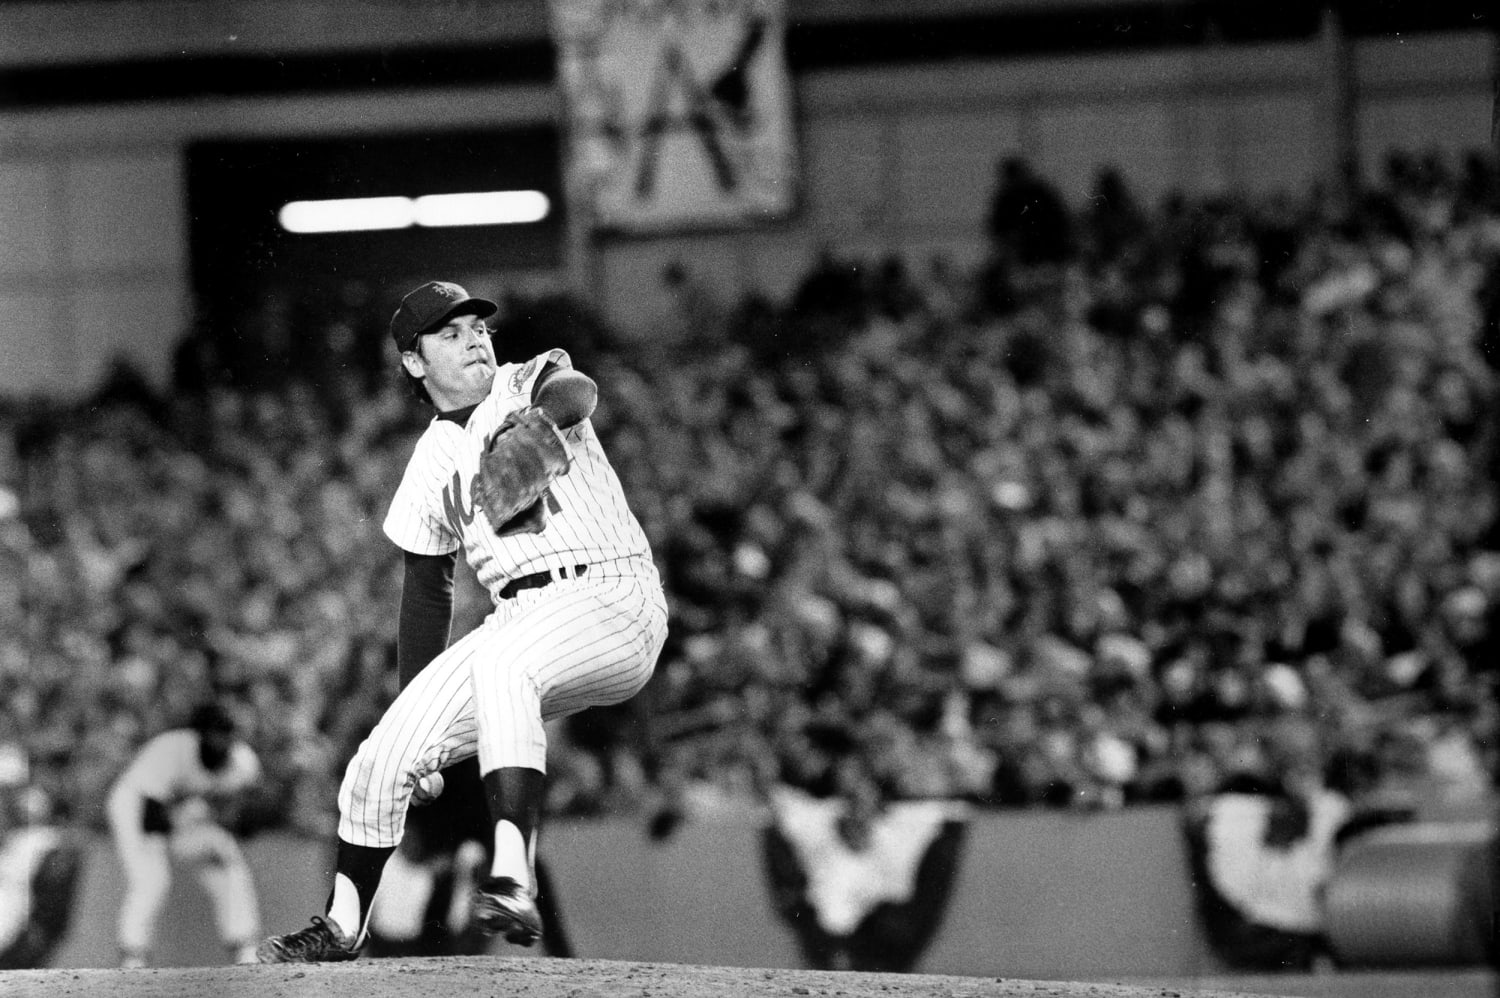 MLB Hall of Famer Tom Seaver Diagnosed with Dementia